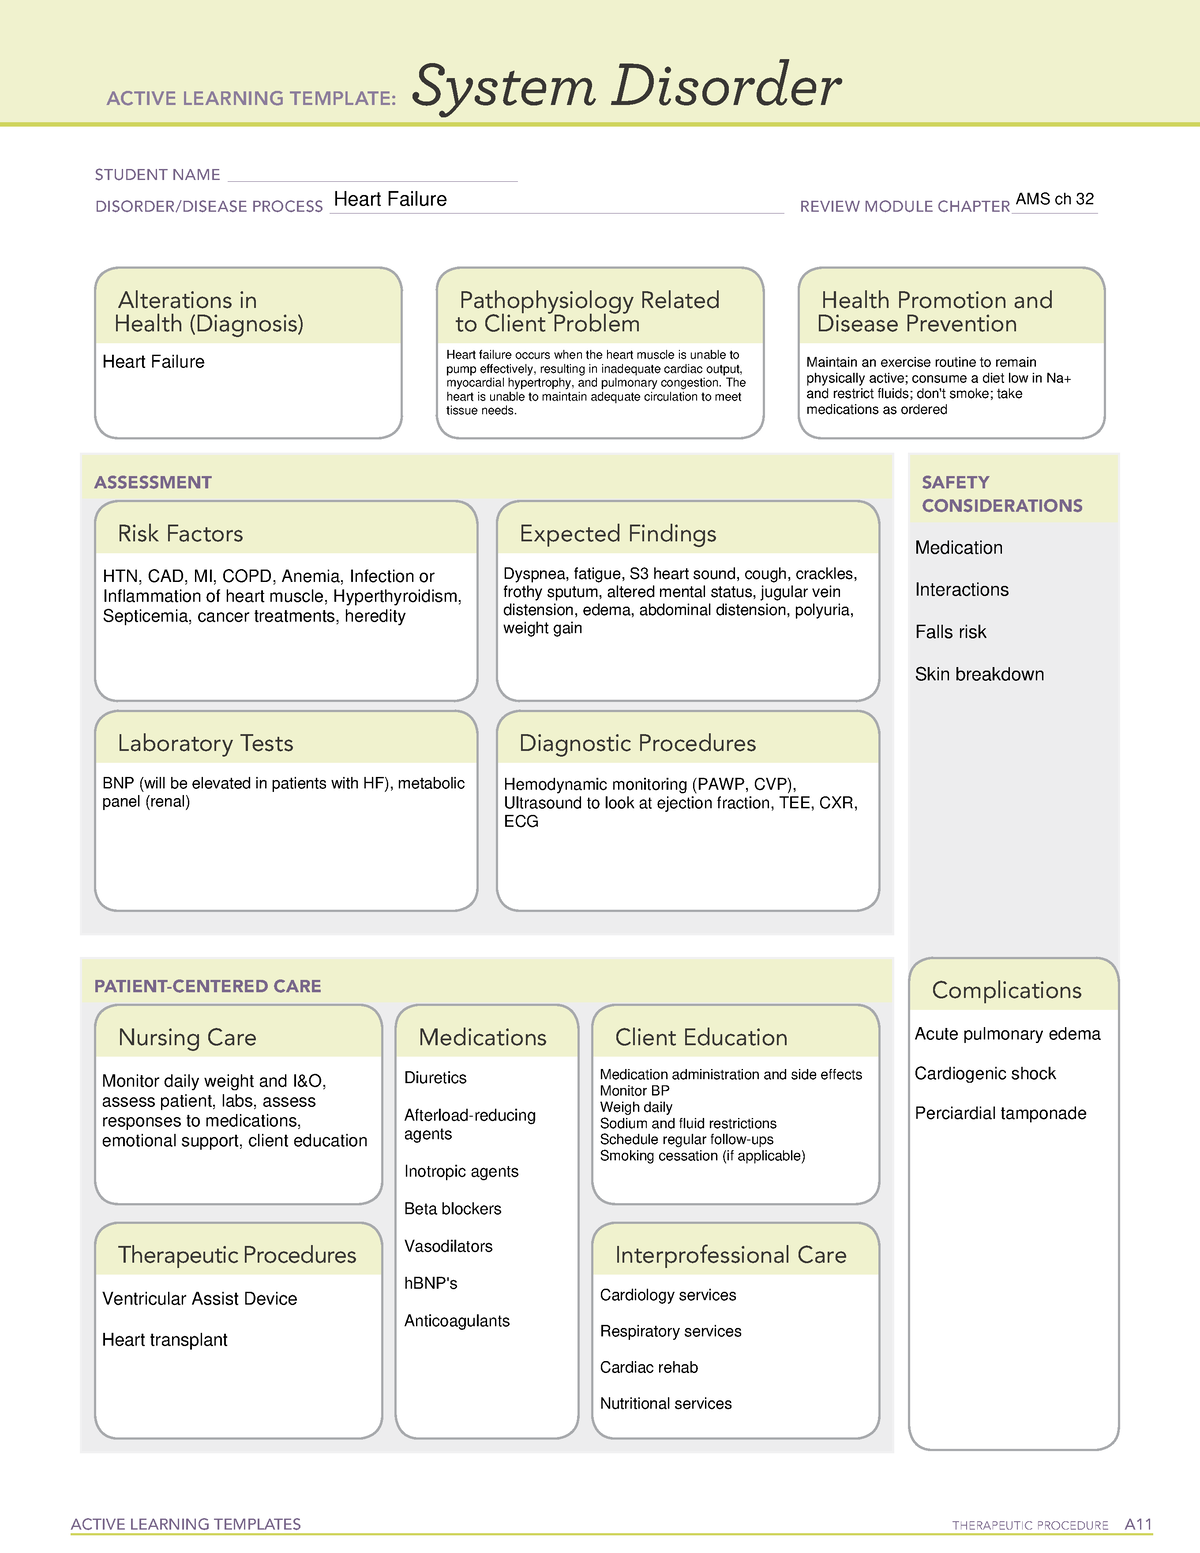 ATI Example of a Concept Map - ACTIVE LEARNING TEMPLATES THERAPEUTIC ...